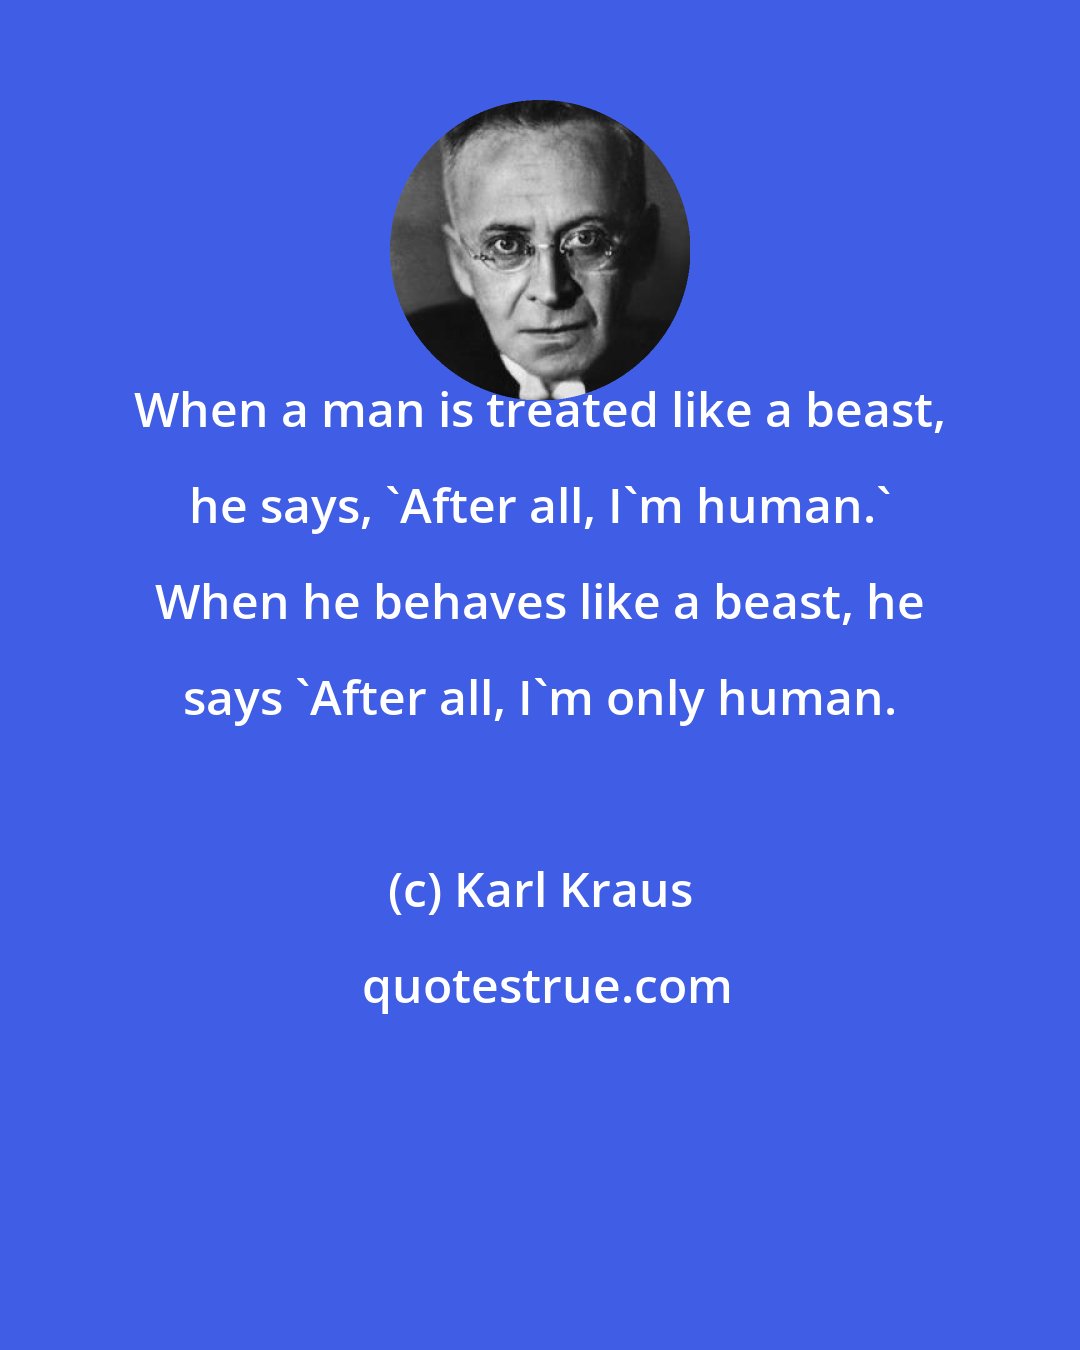 Karl Kraus: When a man is treated like a beast, he says, 'After all, I'm human.' When he behaves like a beast, he says 'After all, I'm only human.